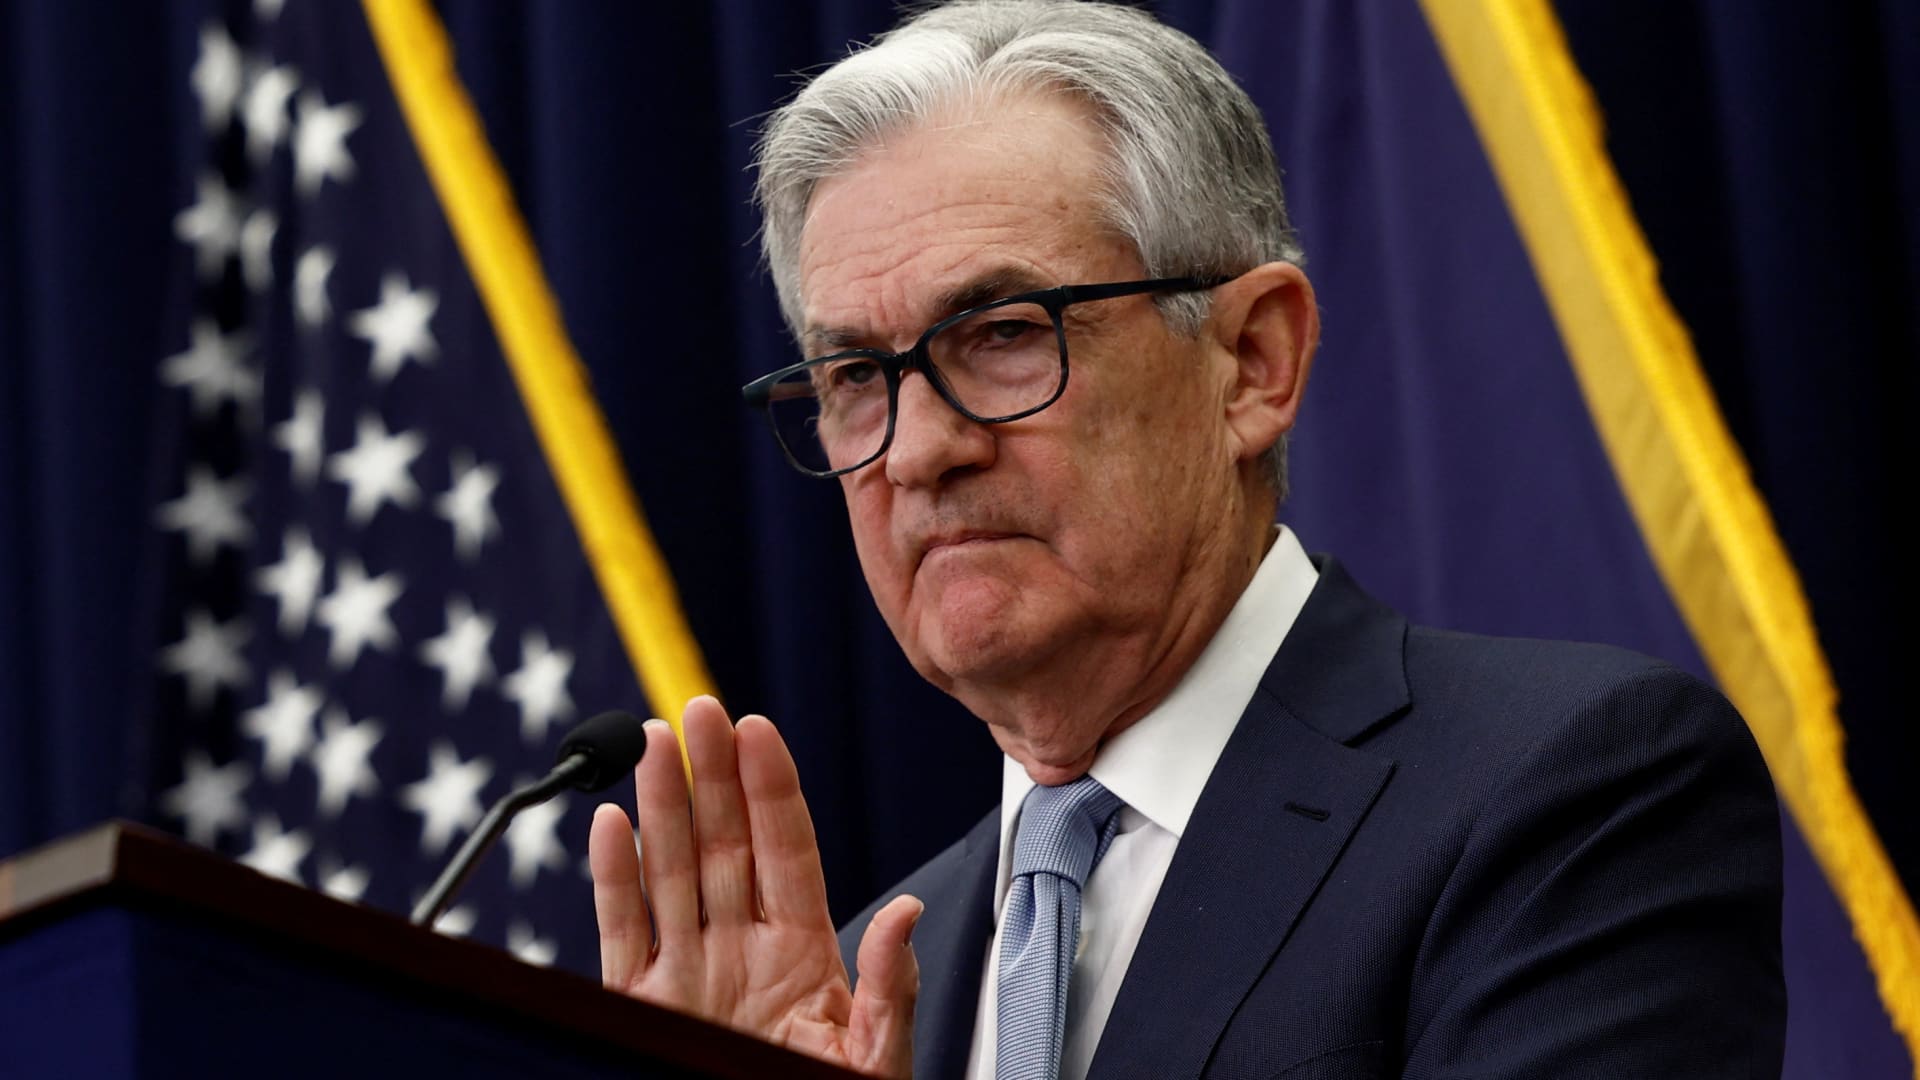 The Federal Reserve is likely to hike rates by a quarter point